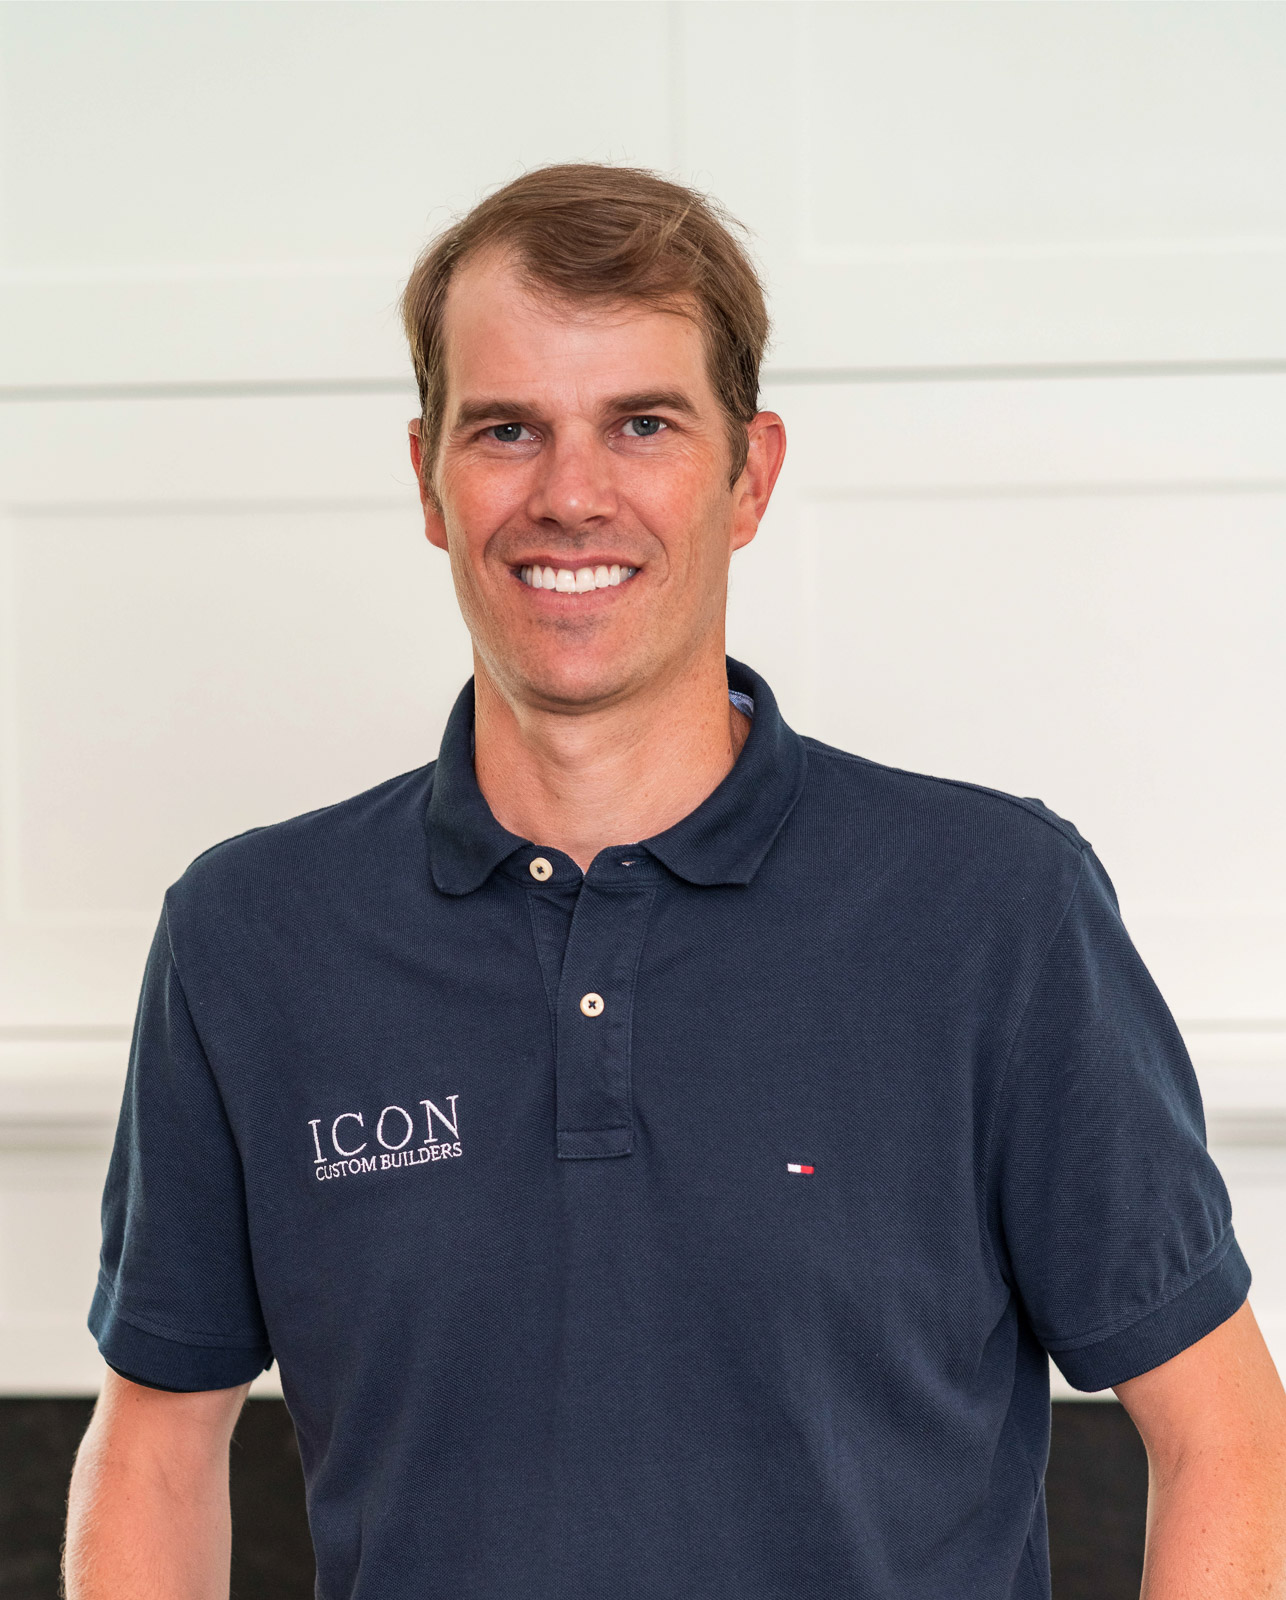 Craig Carter, ICON Project Manager